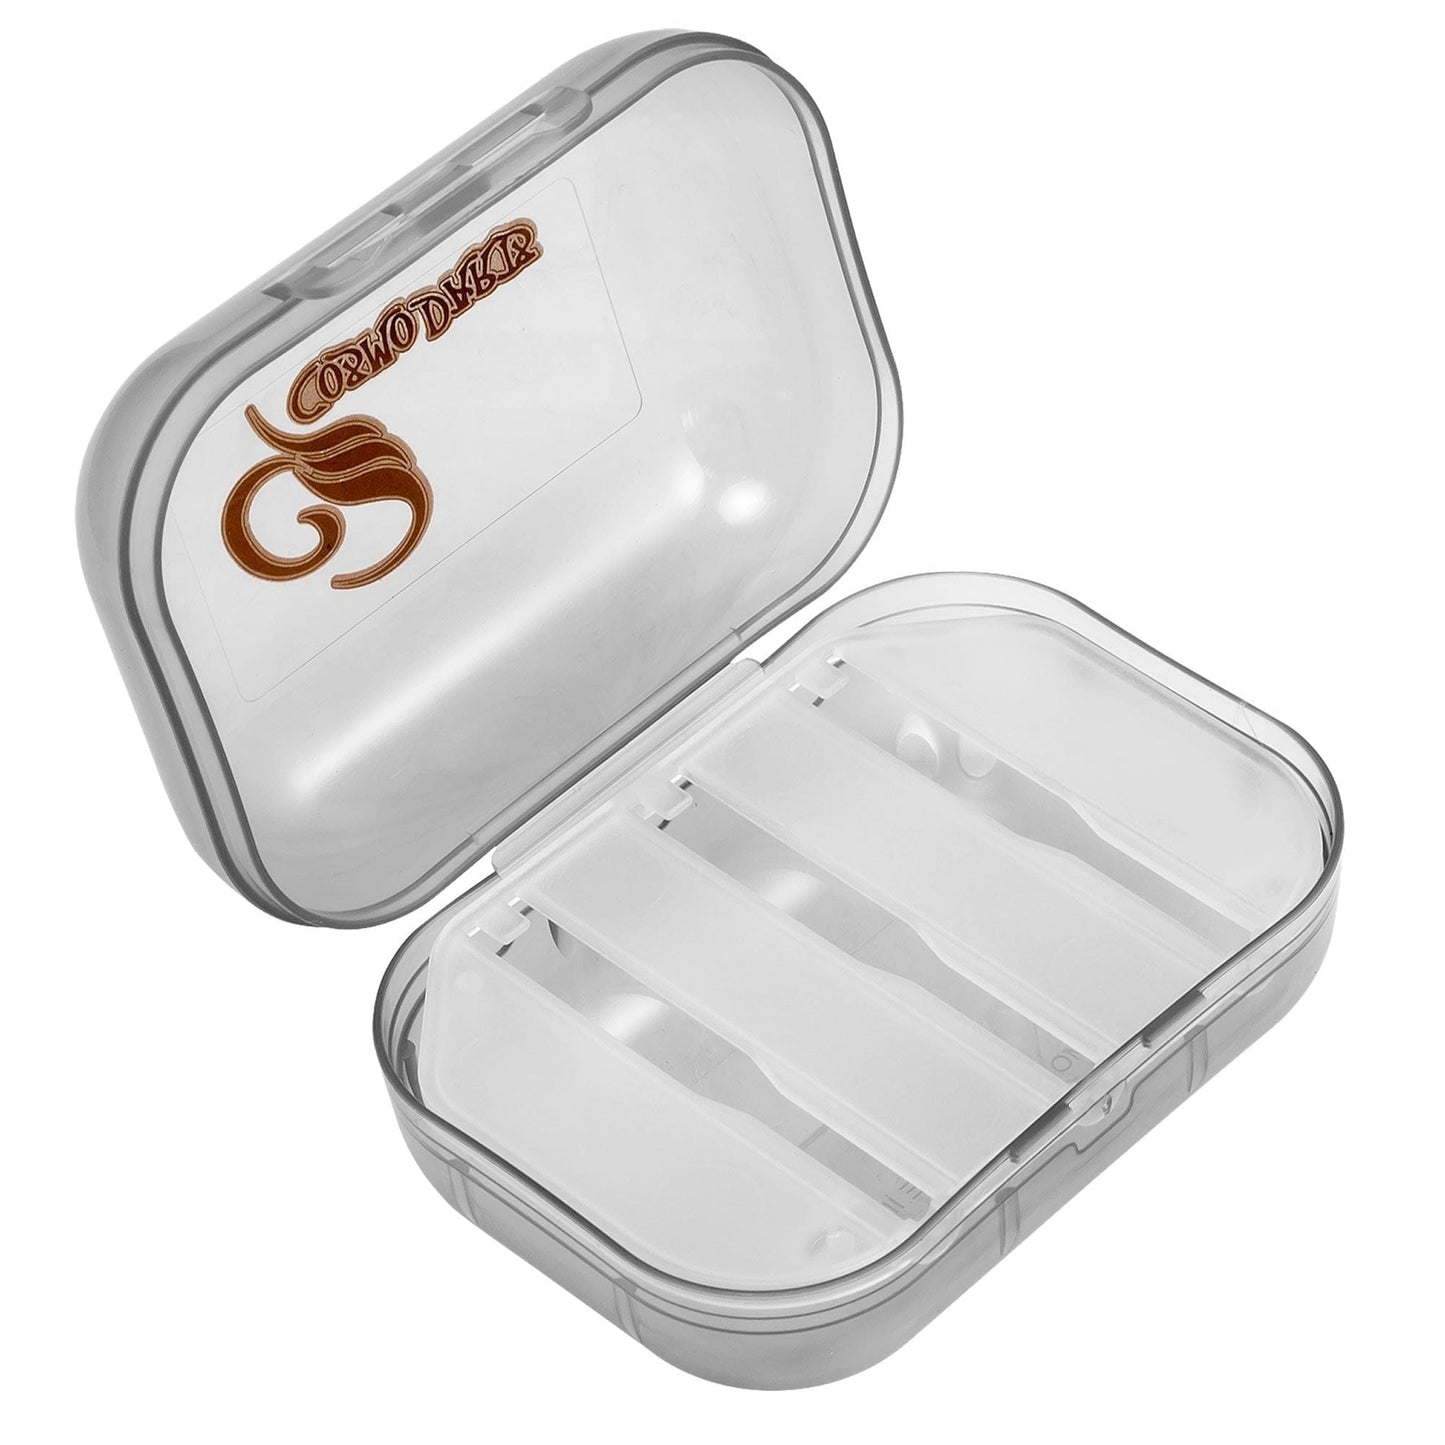 Cosmo Dart Case - Fit Flight - Case SHELL - Small